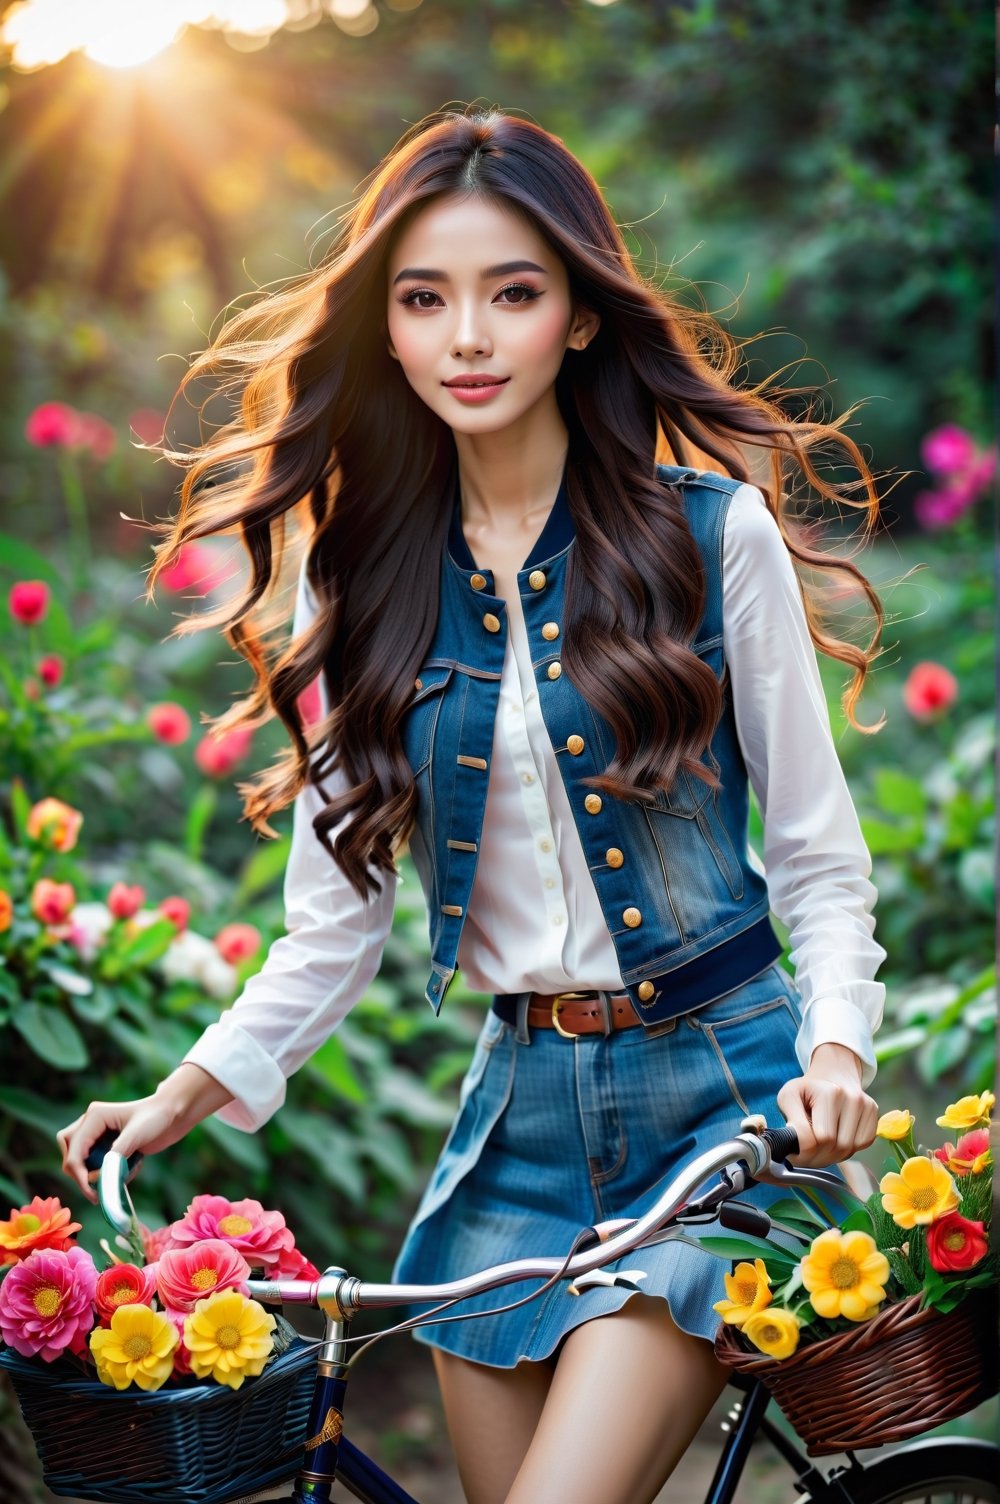 A beautiful girl, similar to Angelababy, on a bicycle carrying a basket of bright colorful flowers, long wavy hair, sun, summer, rays of light, greenery, 15mm, f/215mm, f/2.8, 1/500s, iso2000, high detail, sharp contours, professional photo, 16k. Angelababy.